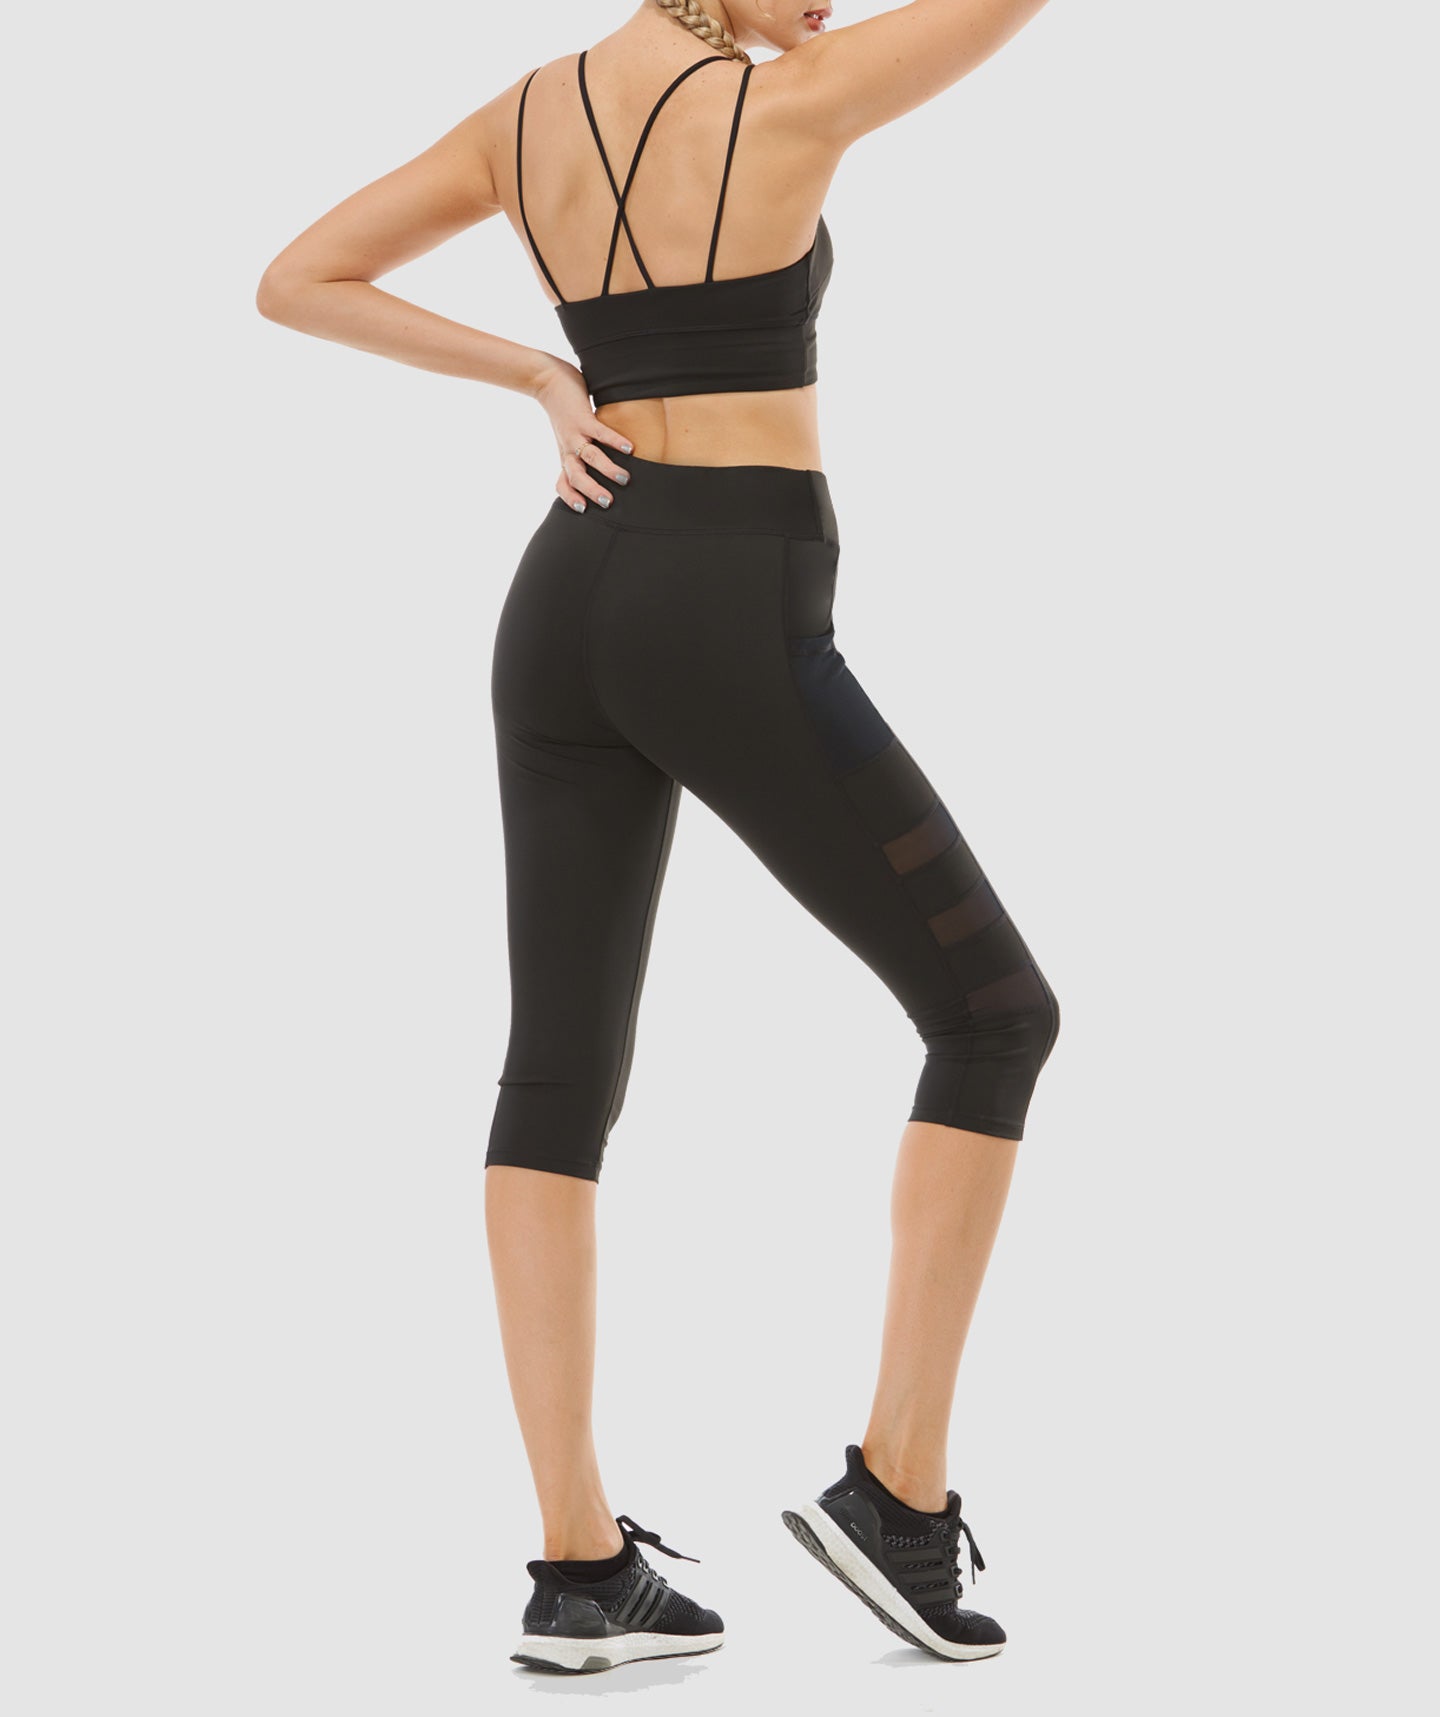 Speed 3/4 Capri Leggings with Transparent Mesh and Side Pockets in Black